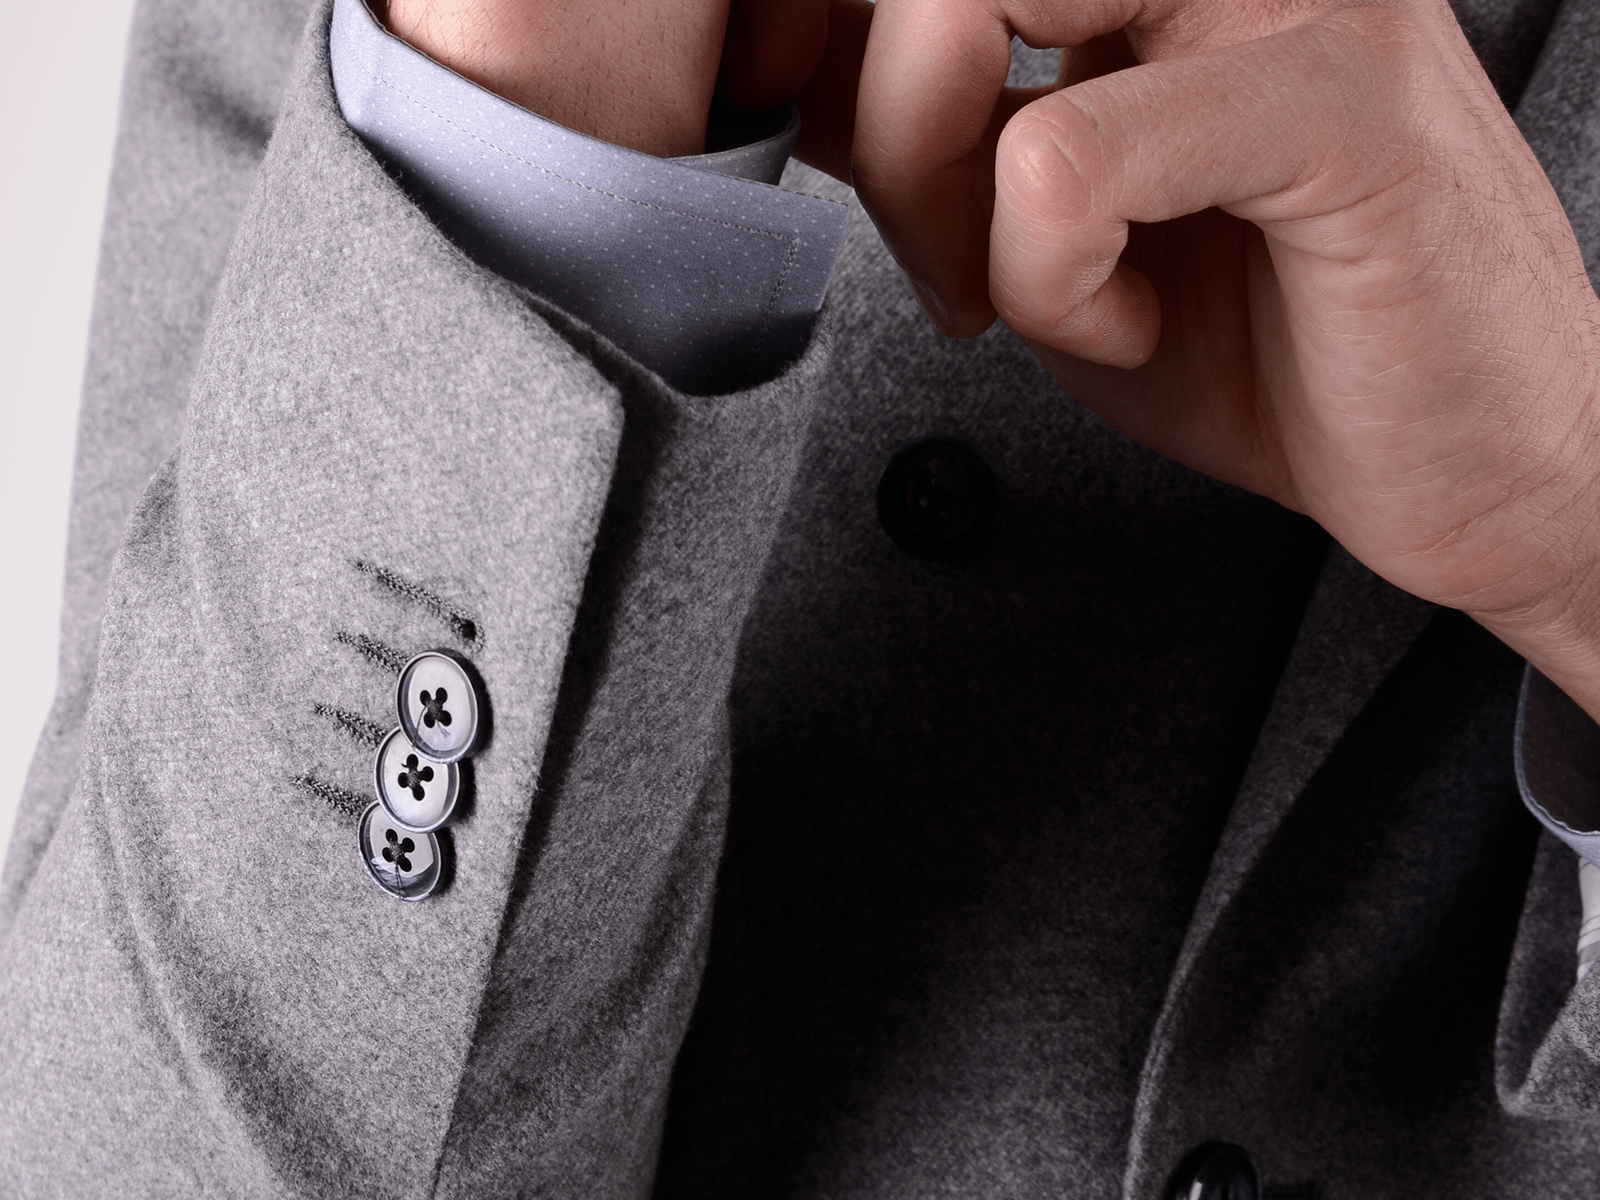 Why are there buttons on suit jacket sleeves? Here's what they are for